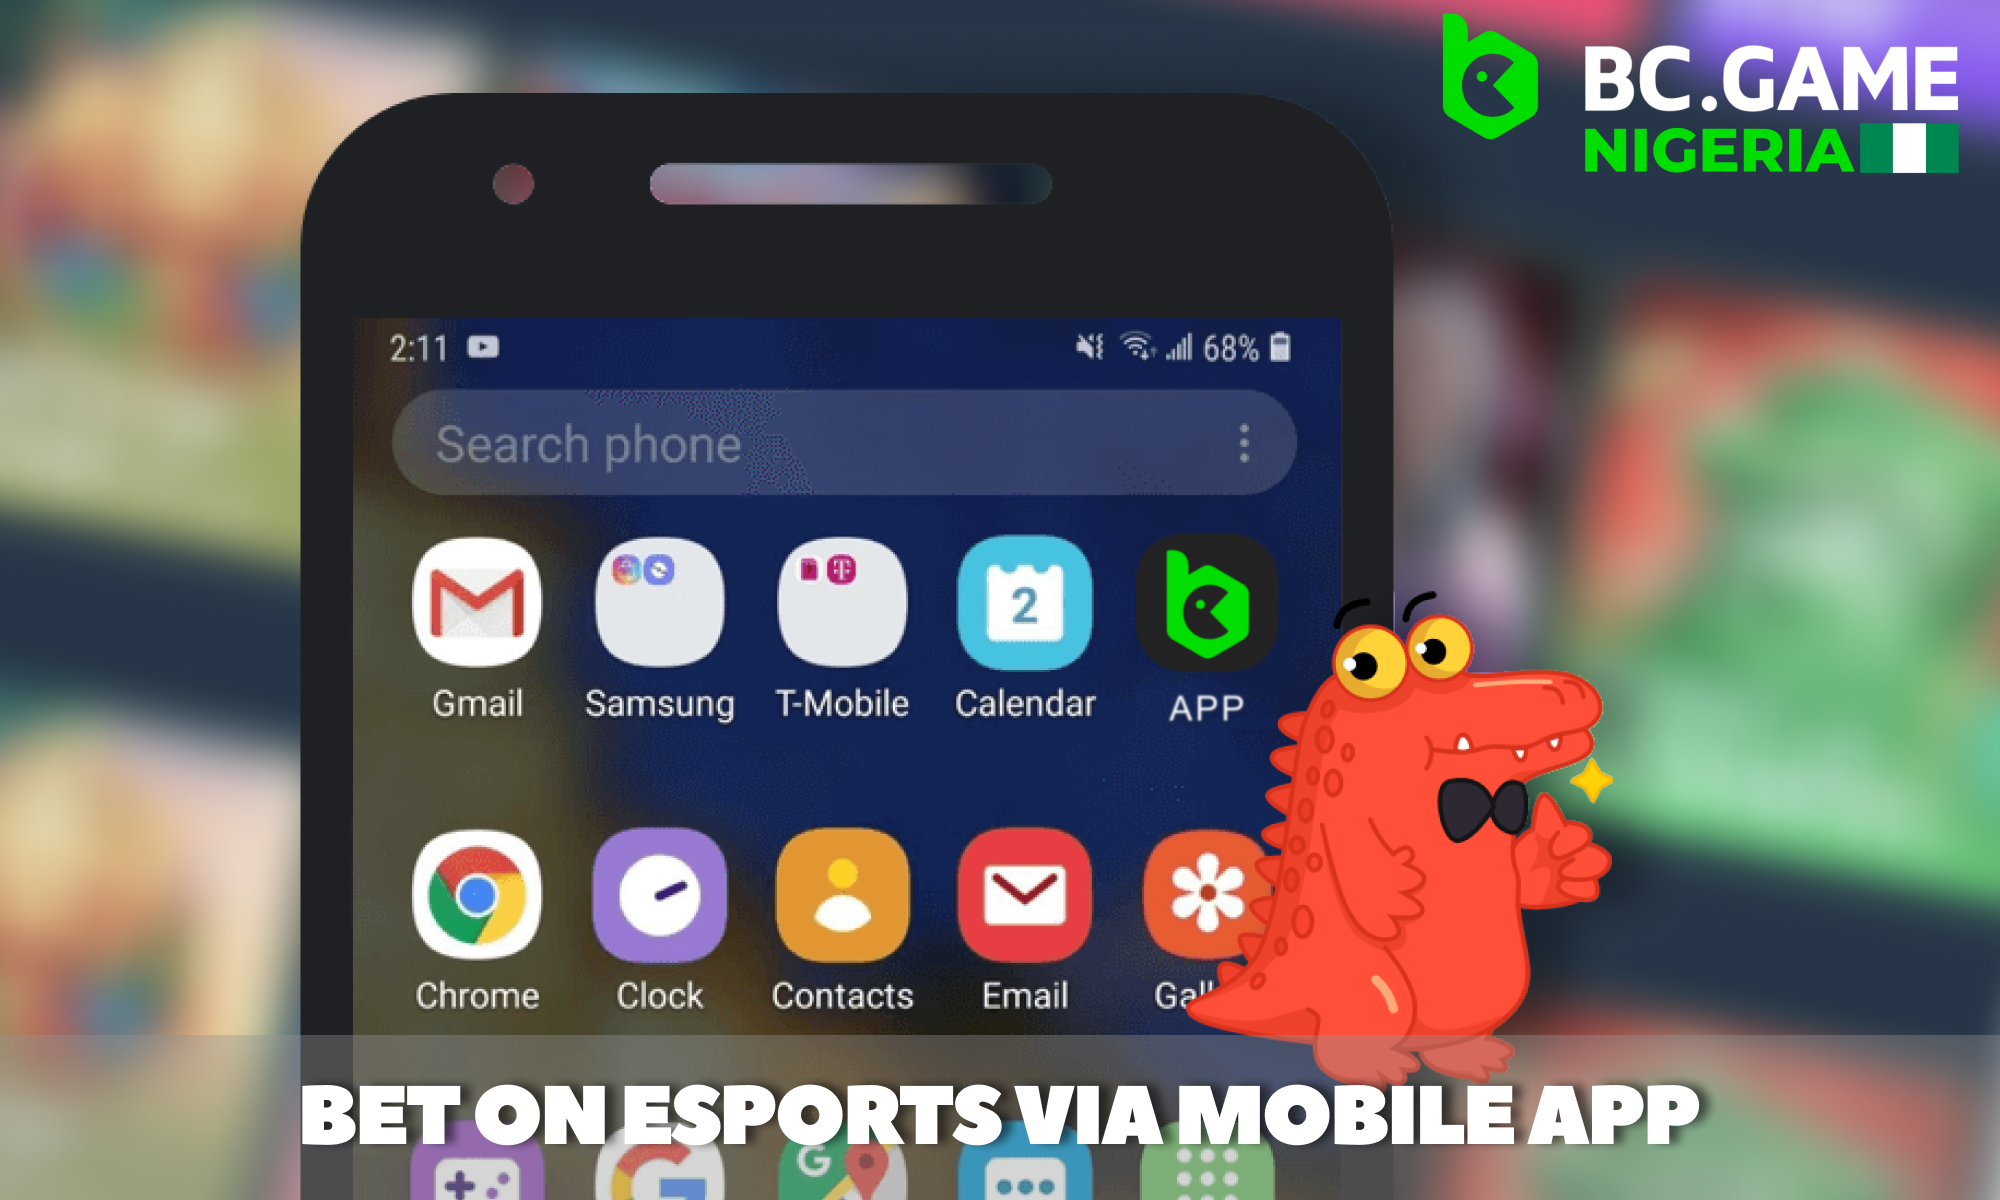 How to bet on Esports in Nigeria via BC Game Mobile App